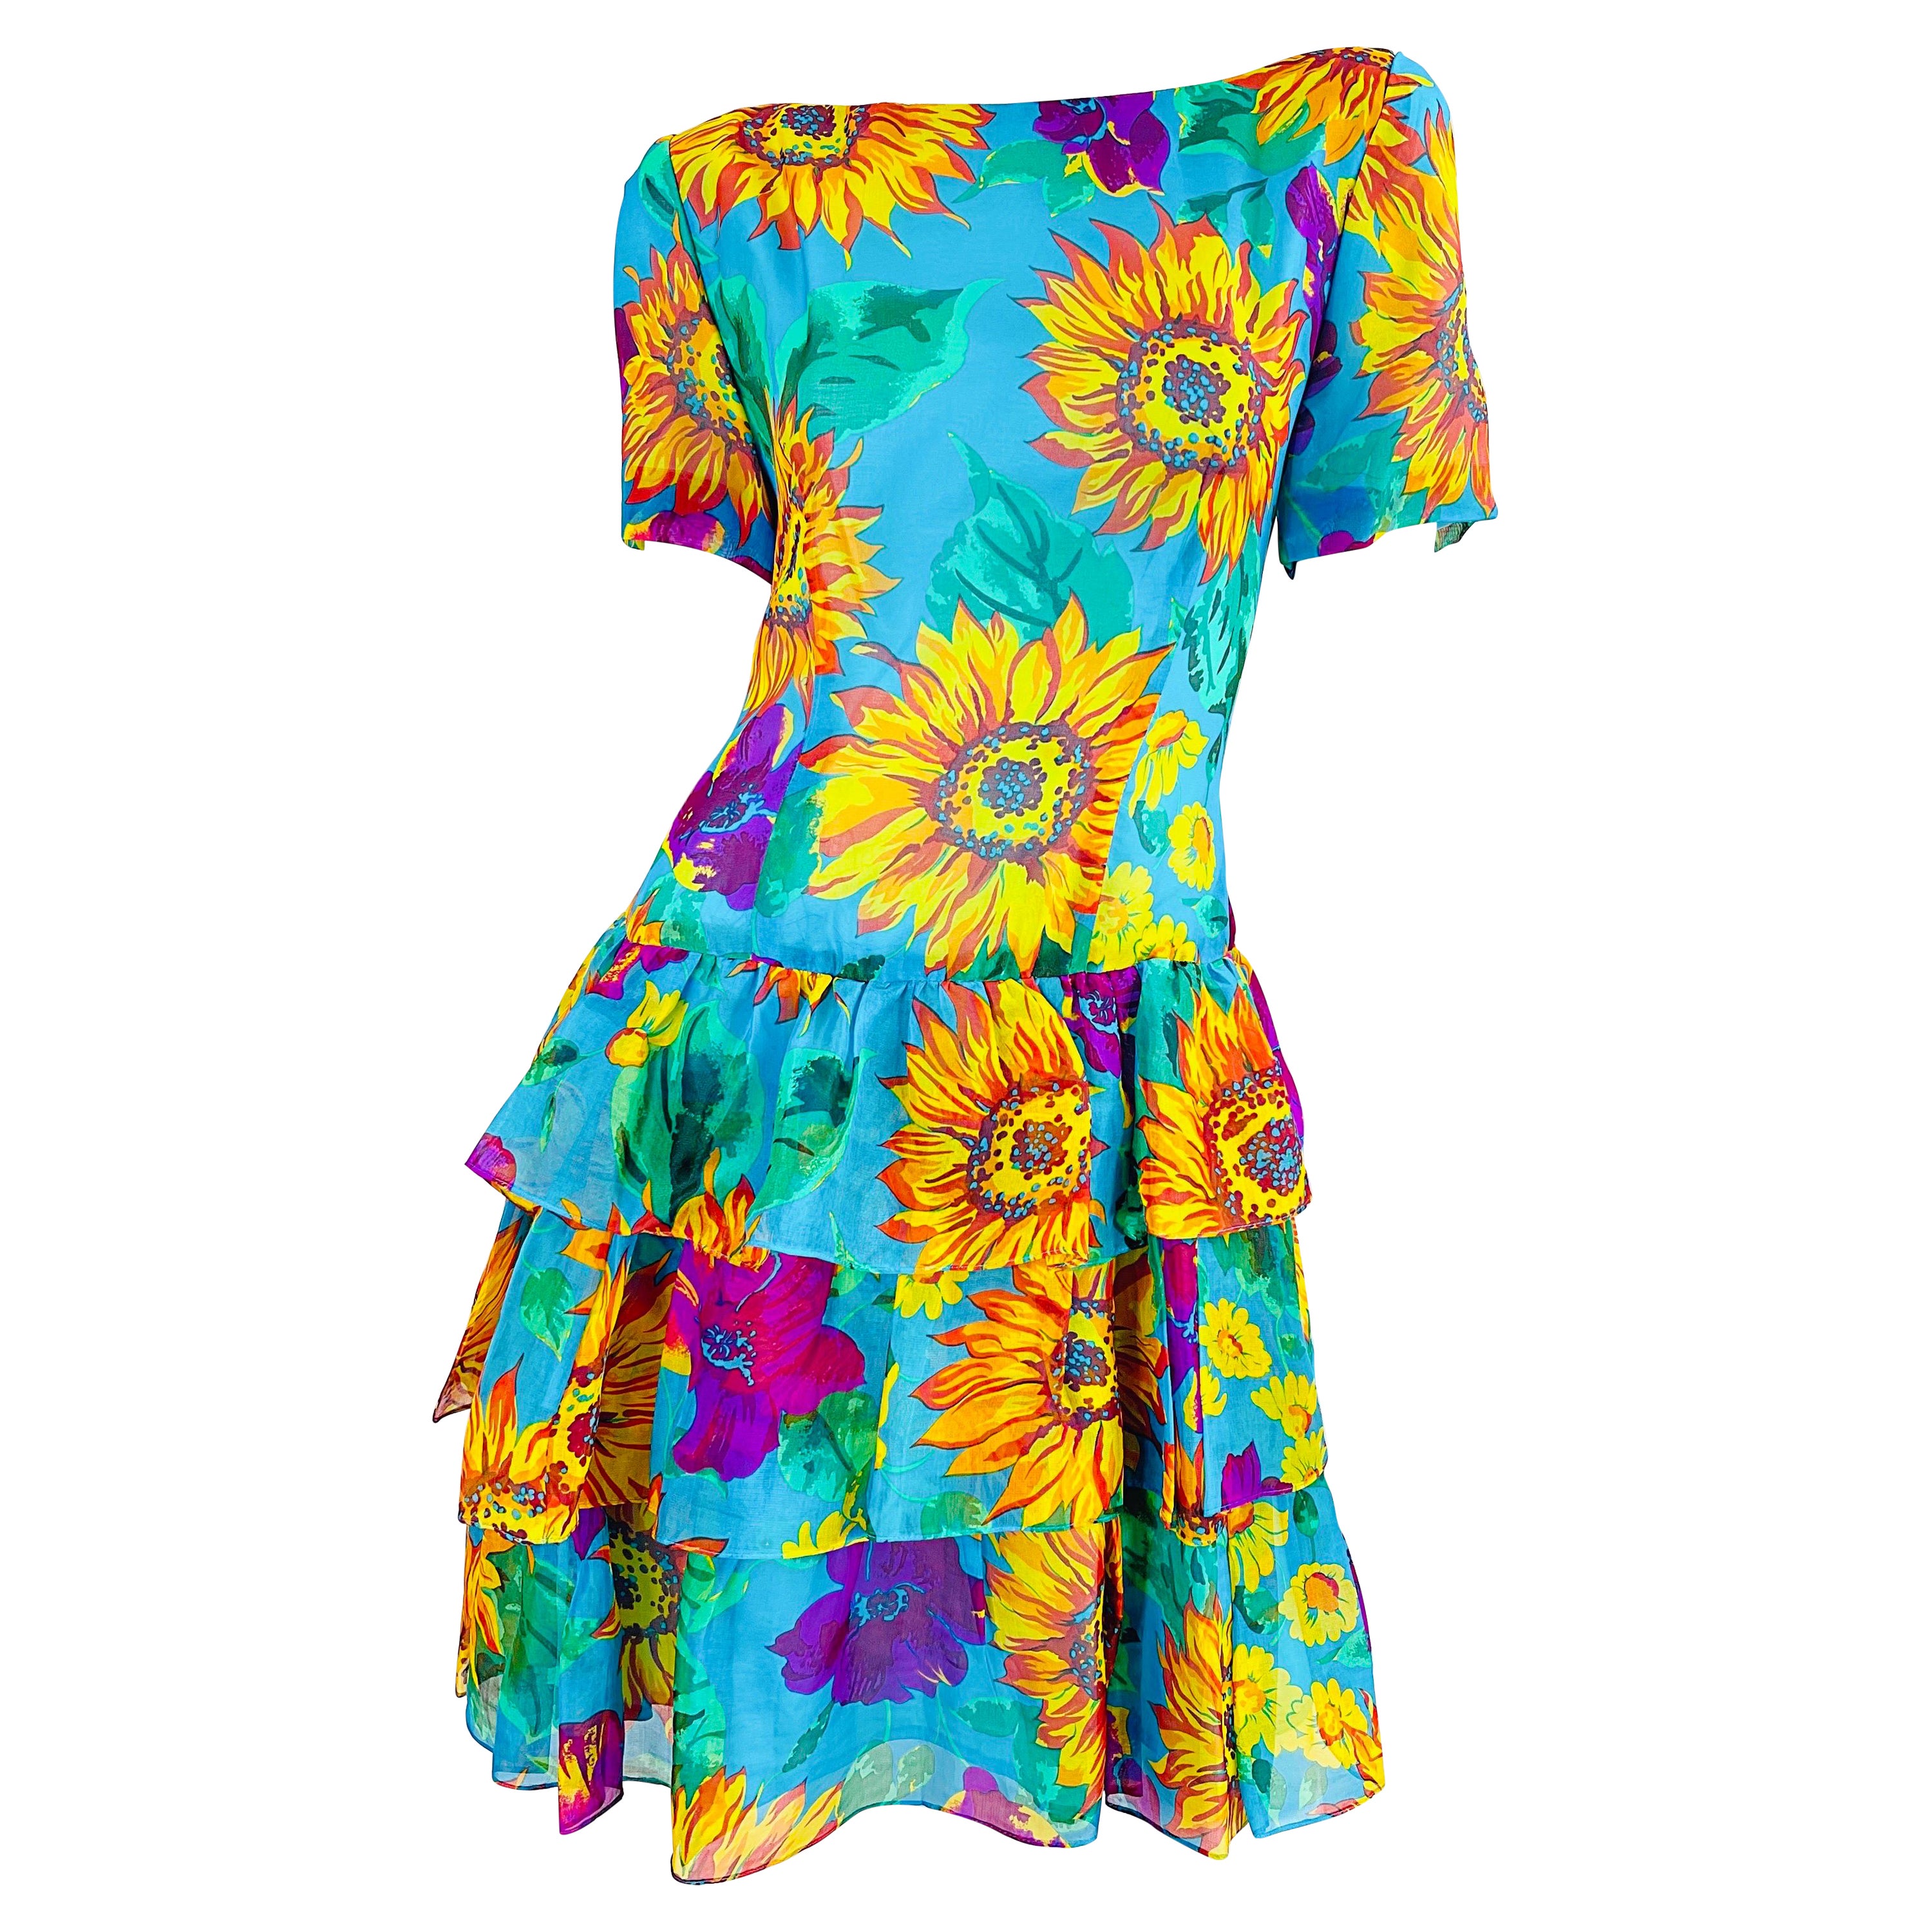 Chic 1980s Silk Chiffon Size 8 / 10 Sunflower Print Turquoise Vintage 80s Dress For Sale